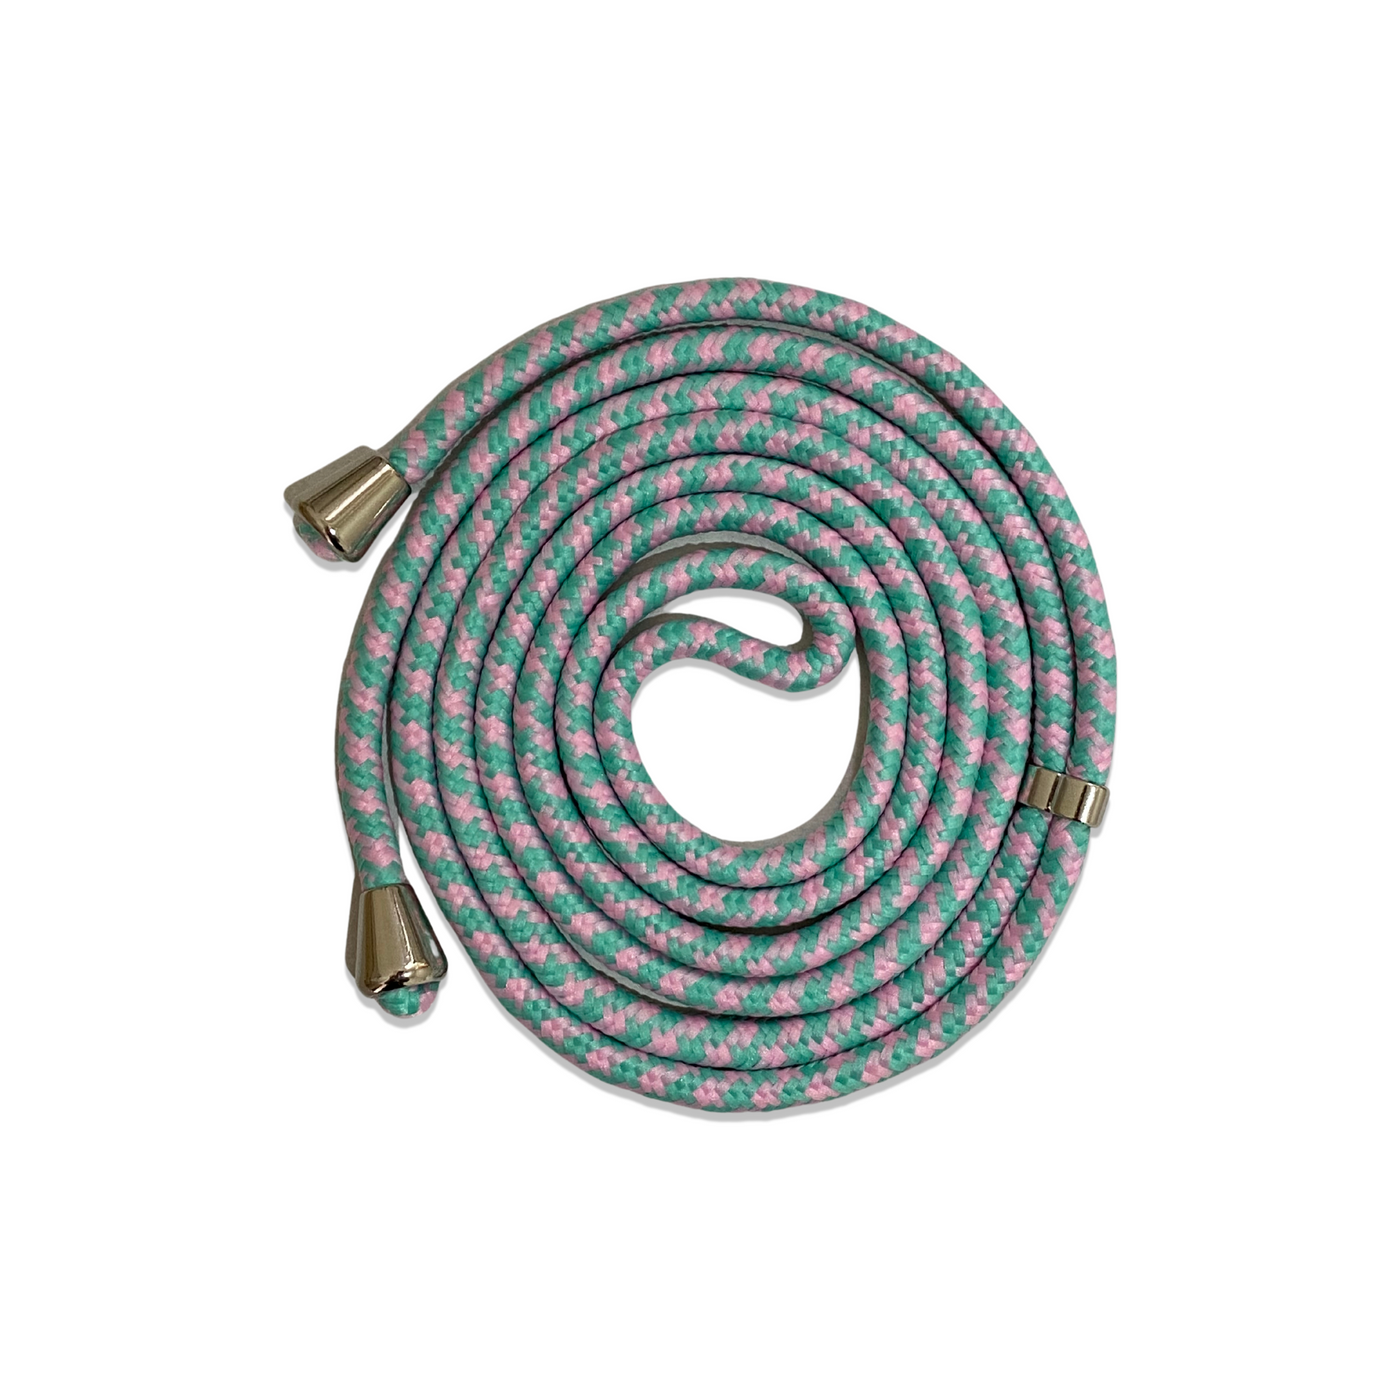 ROPE STRAP - MINTY PINK - INTERCHANGEABLE